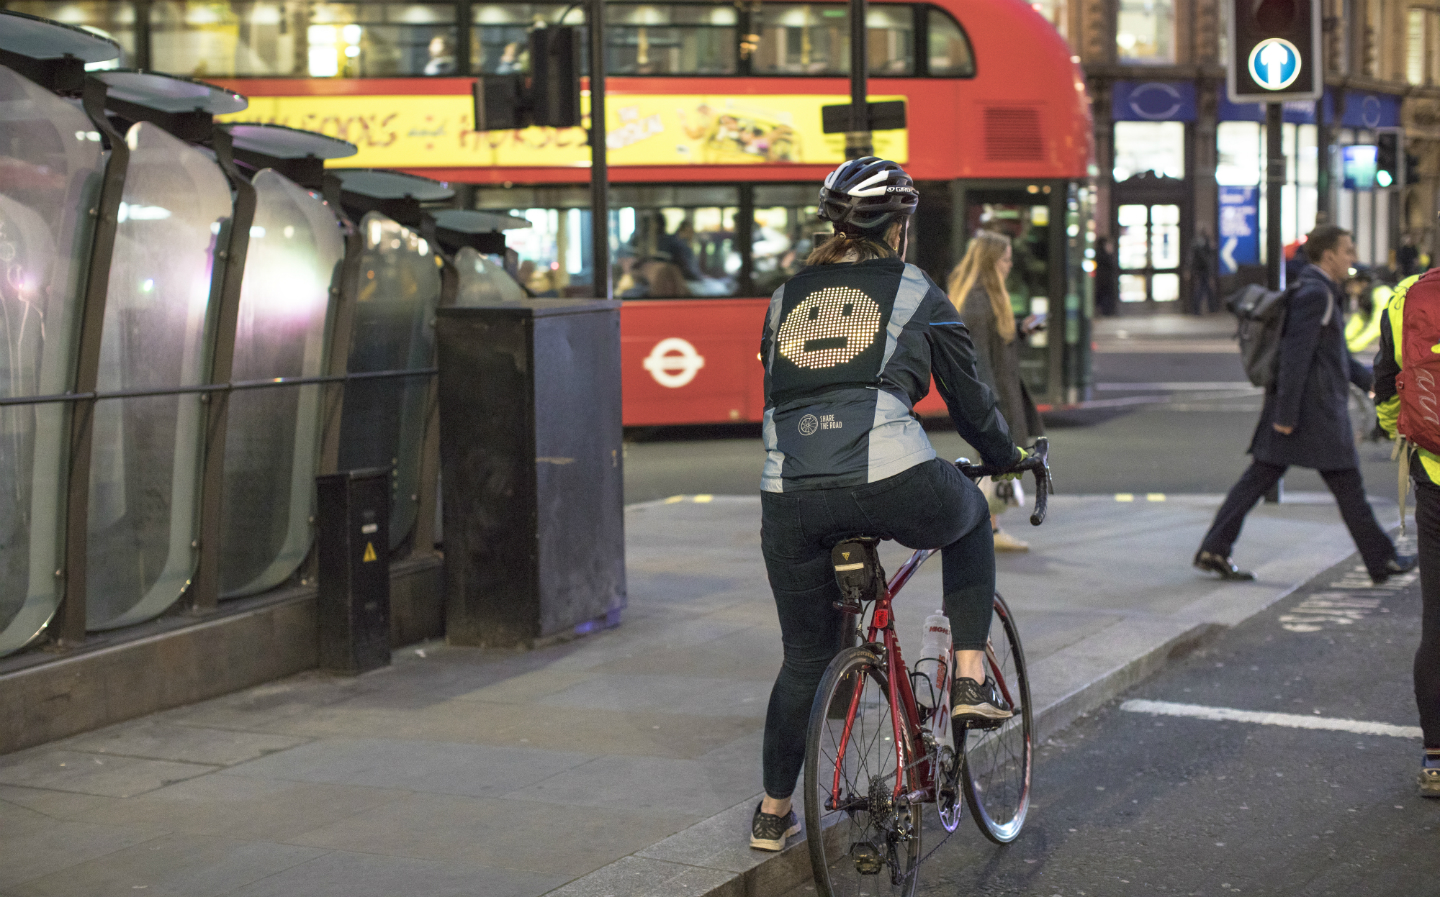 Ford develops "emoji jacket" for cyclists to wear on the road